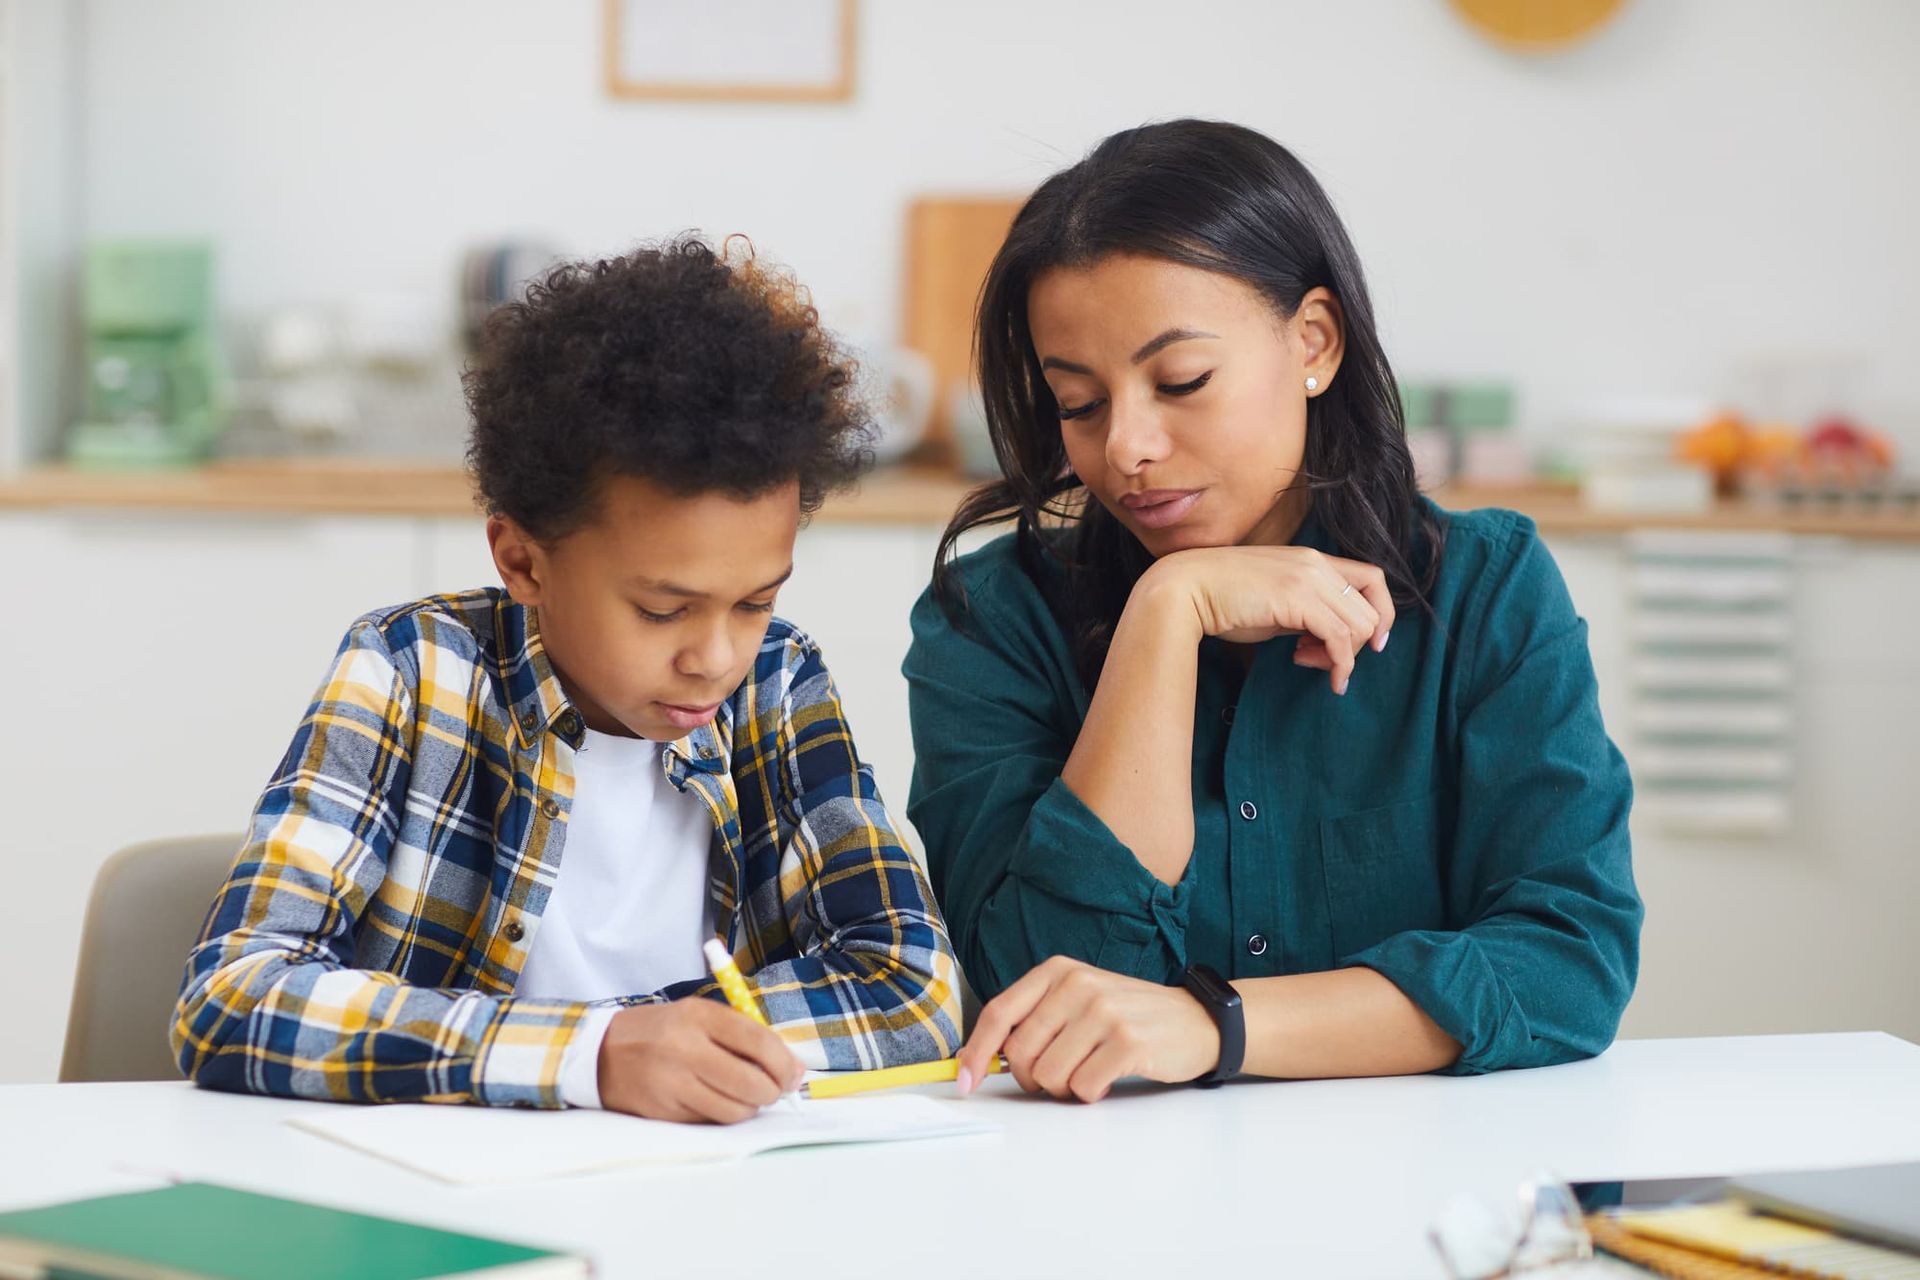 A woman helping a young boy with his homework.